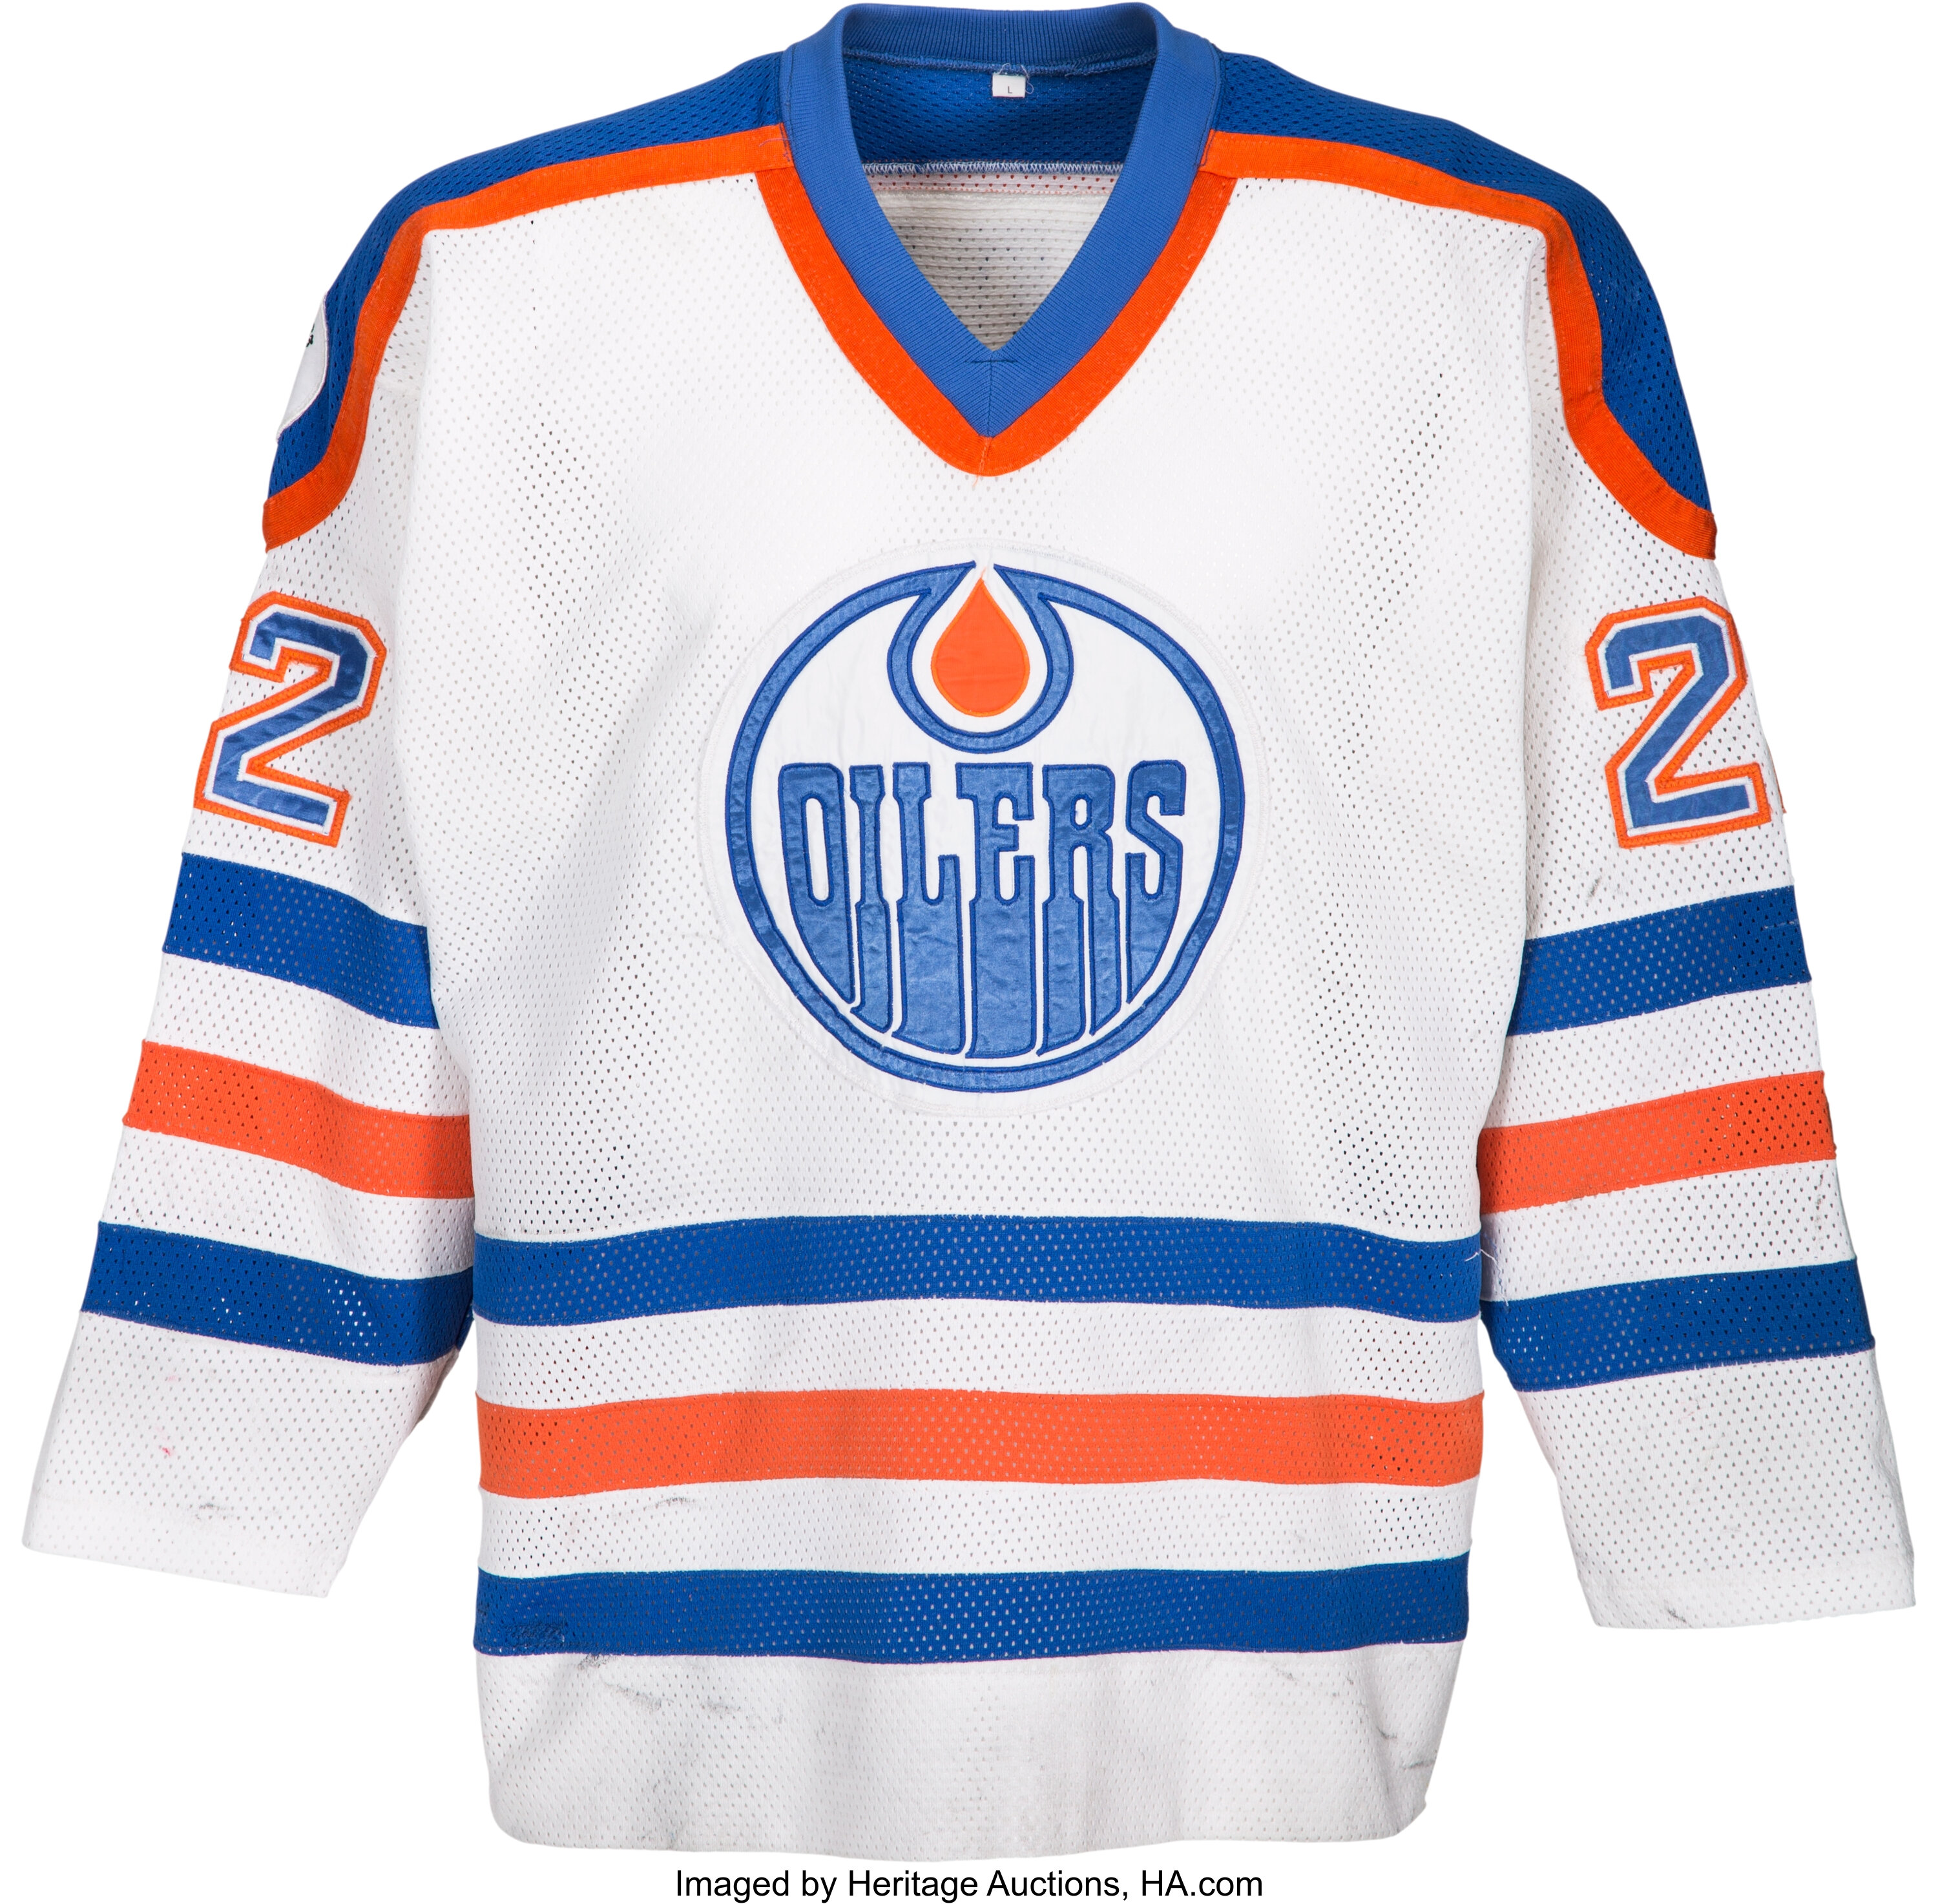 Edmonton Oilers on X: Game-worn jerseys 🤤🤤 We currently have a full set  of #Oilers Reverse Retro uniforms up for auction! These threads were worn  Dec. 15 vs. St. Louis & Dec.